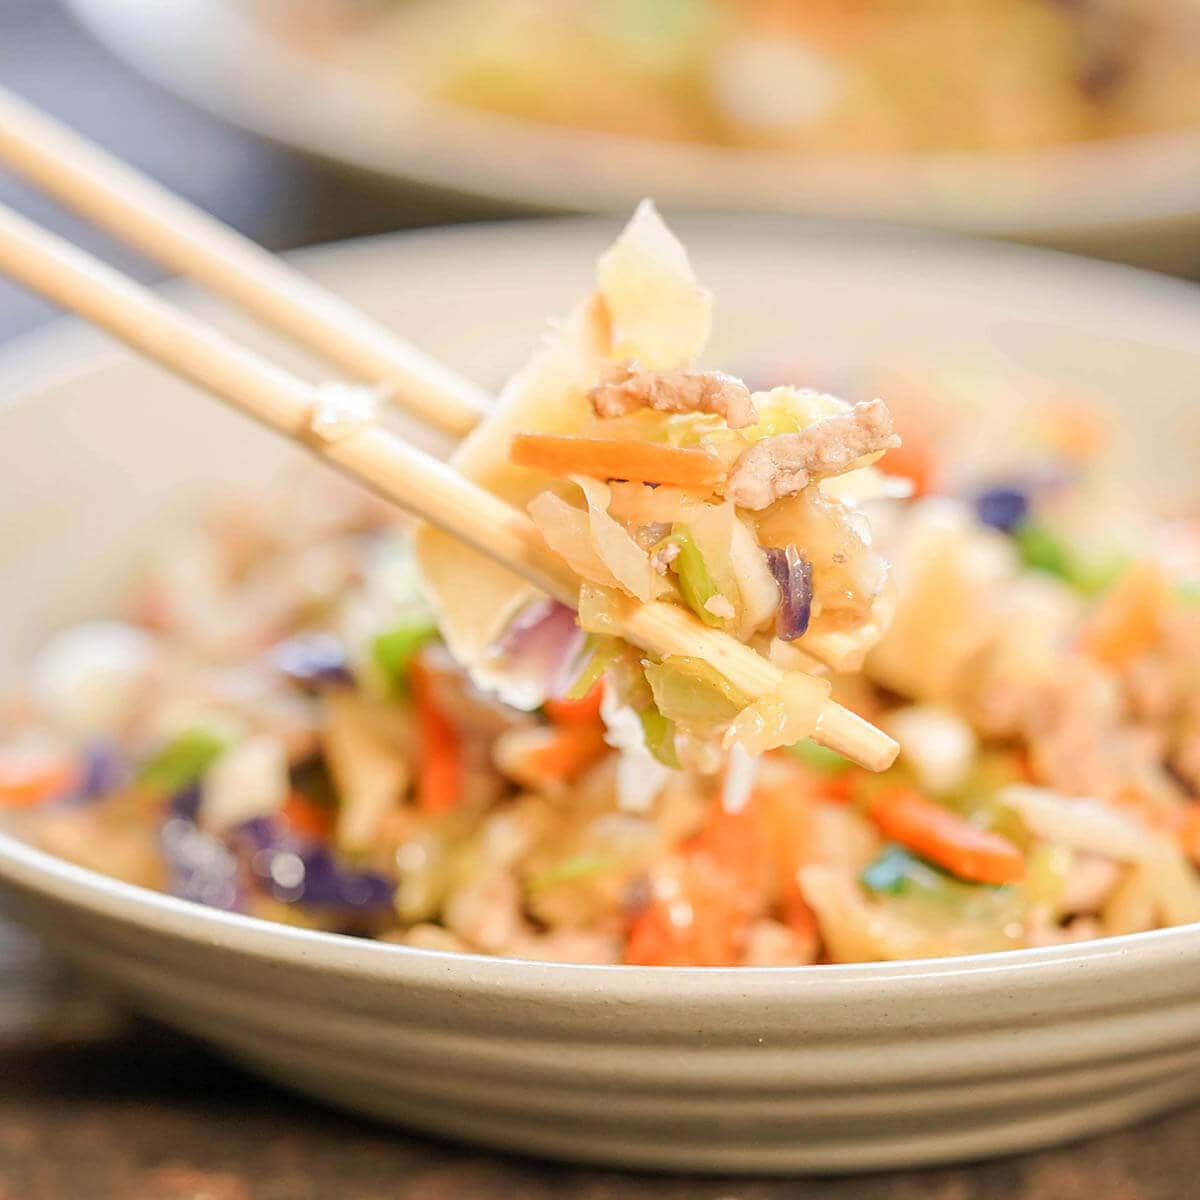 Egg Roll in a bowl with chopsticks.